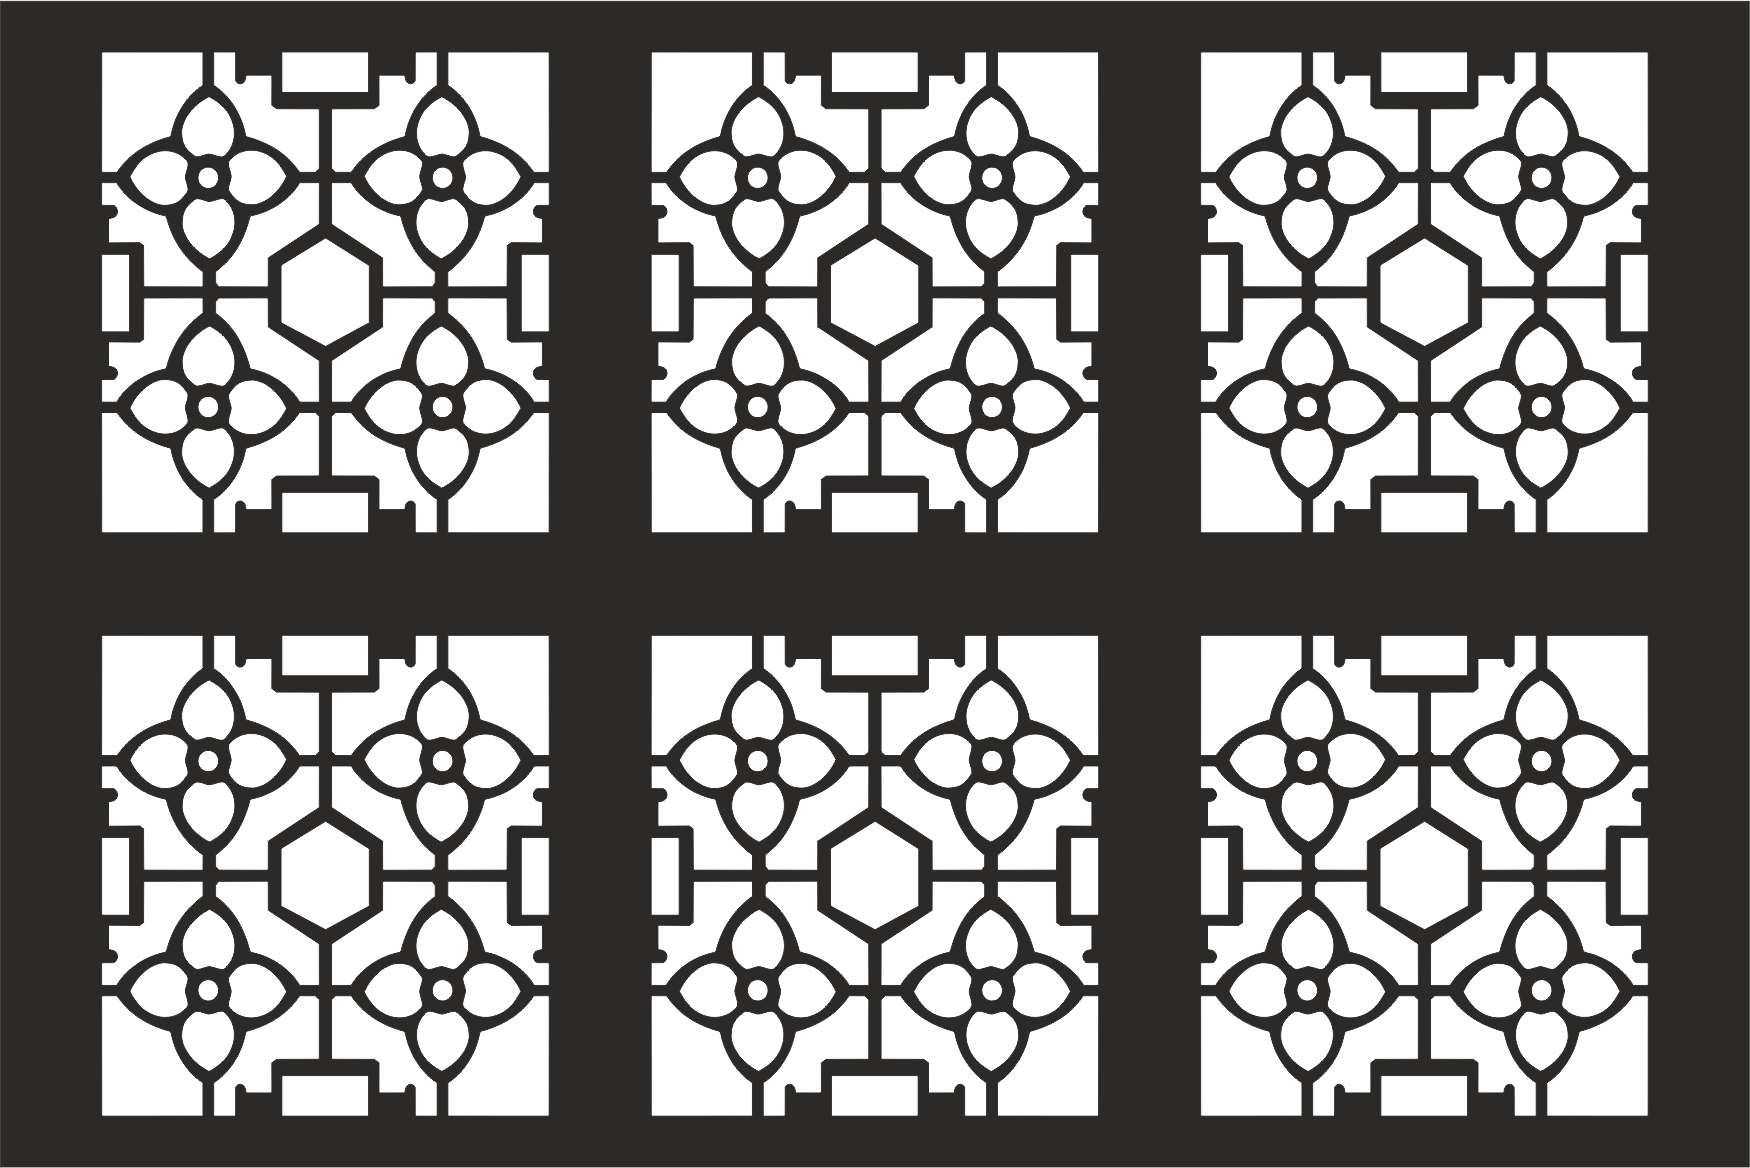 Decorative Grille Pattern Free CDR Vectors File